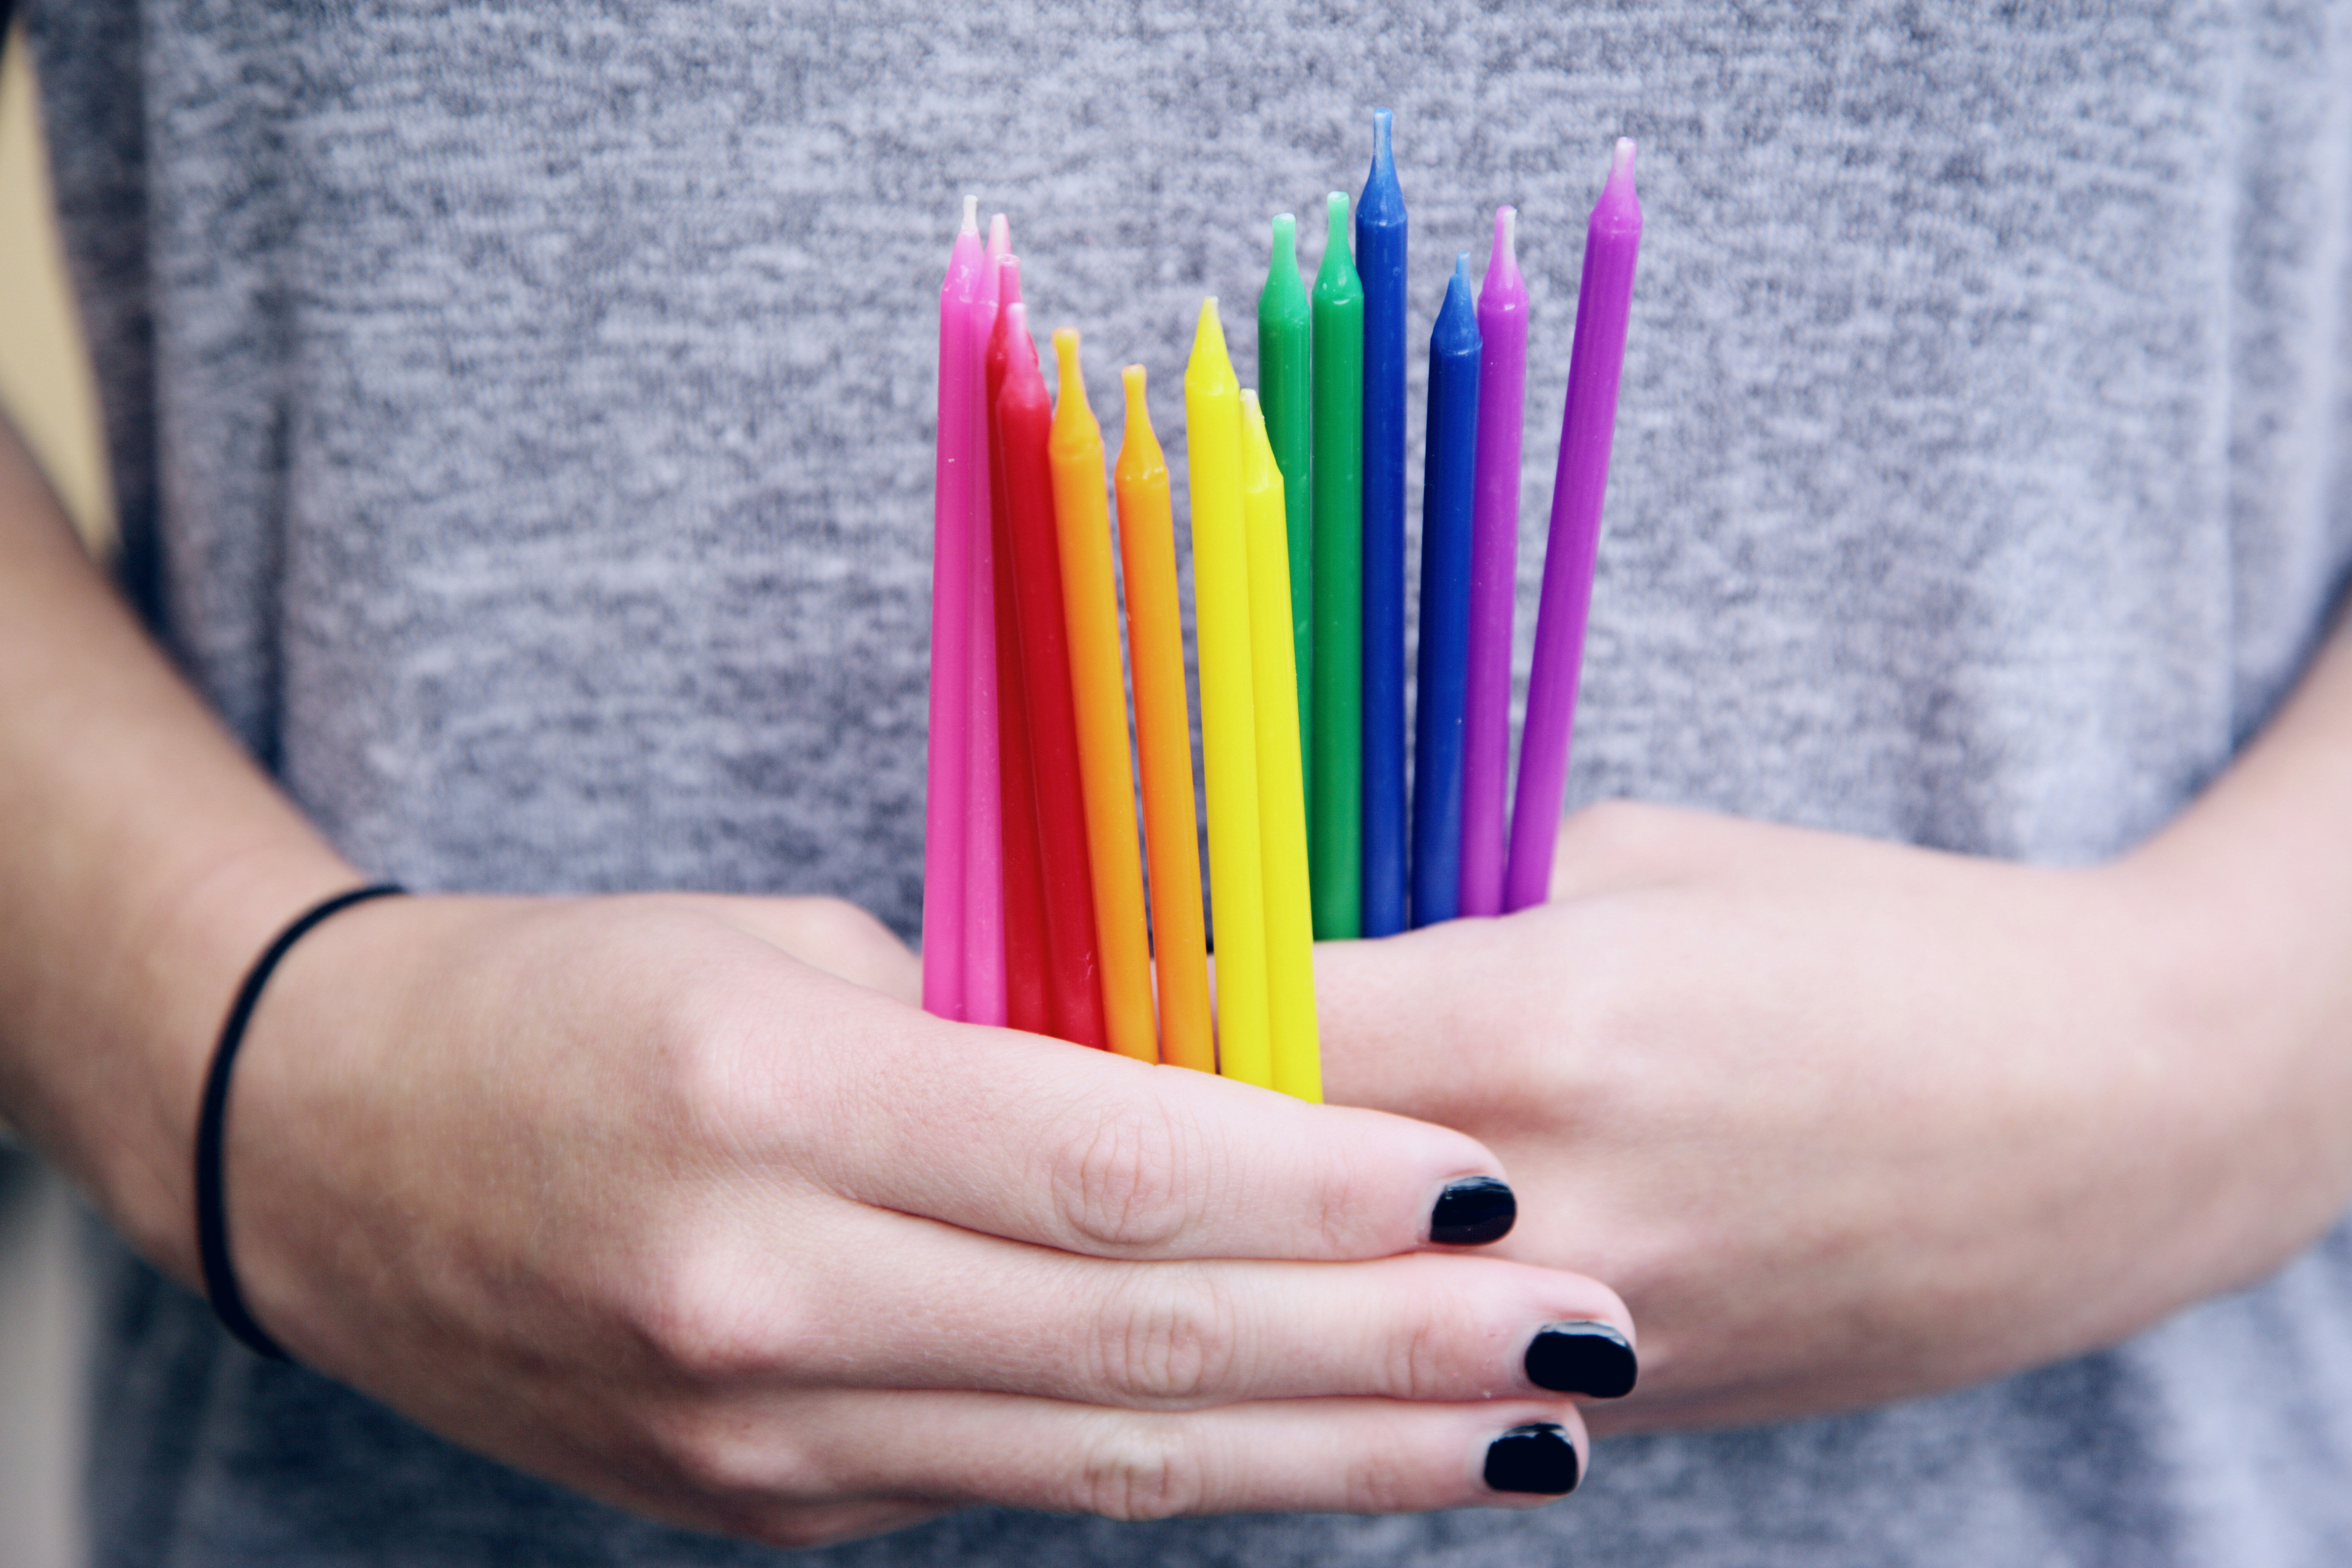 A person holding a collection of colorful birthday candles, representing each color of the rainbow. These were bundled up and added to part of a travel altar kit that is being sold on Etsy.